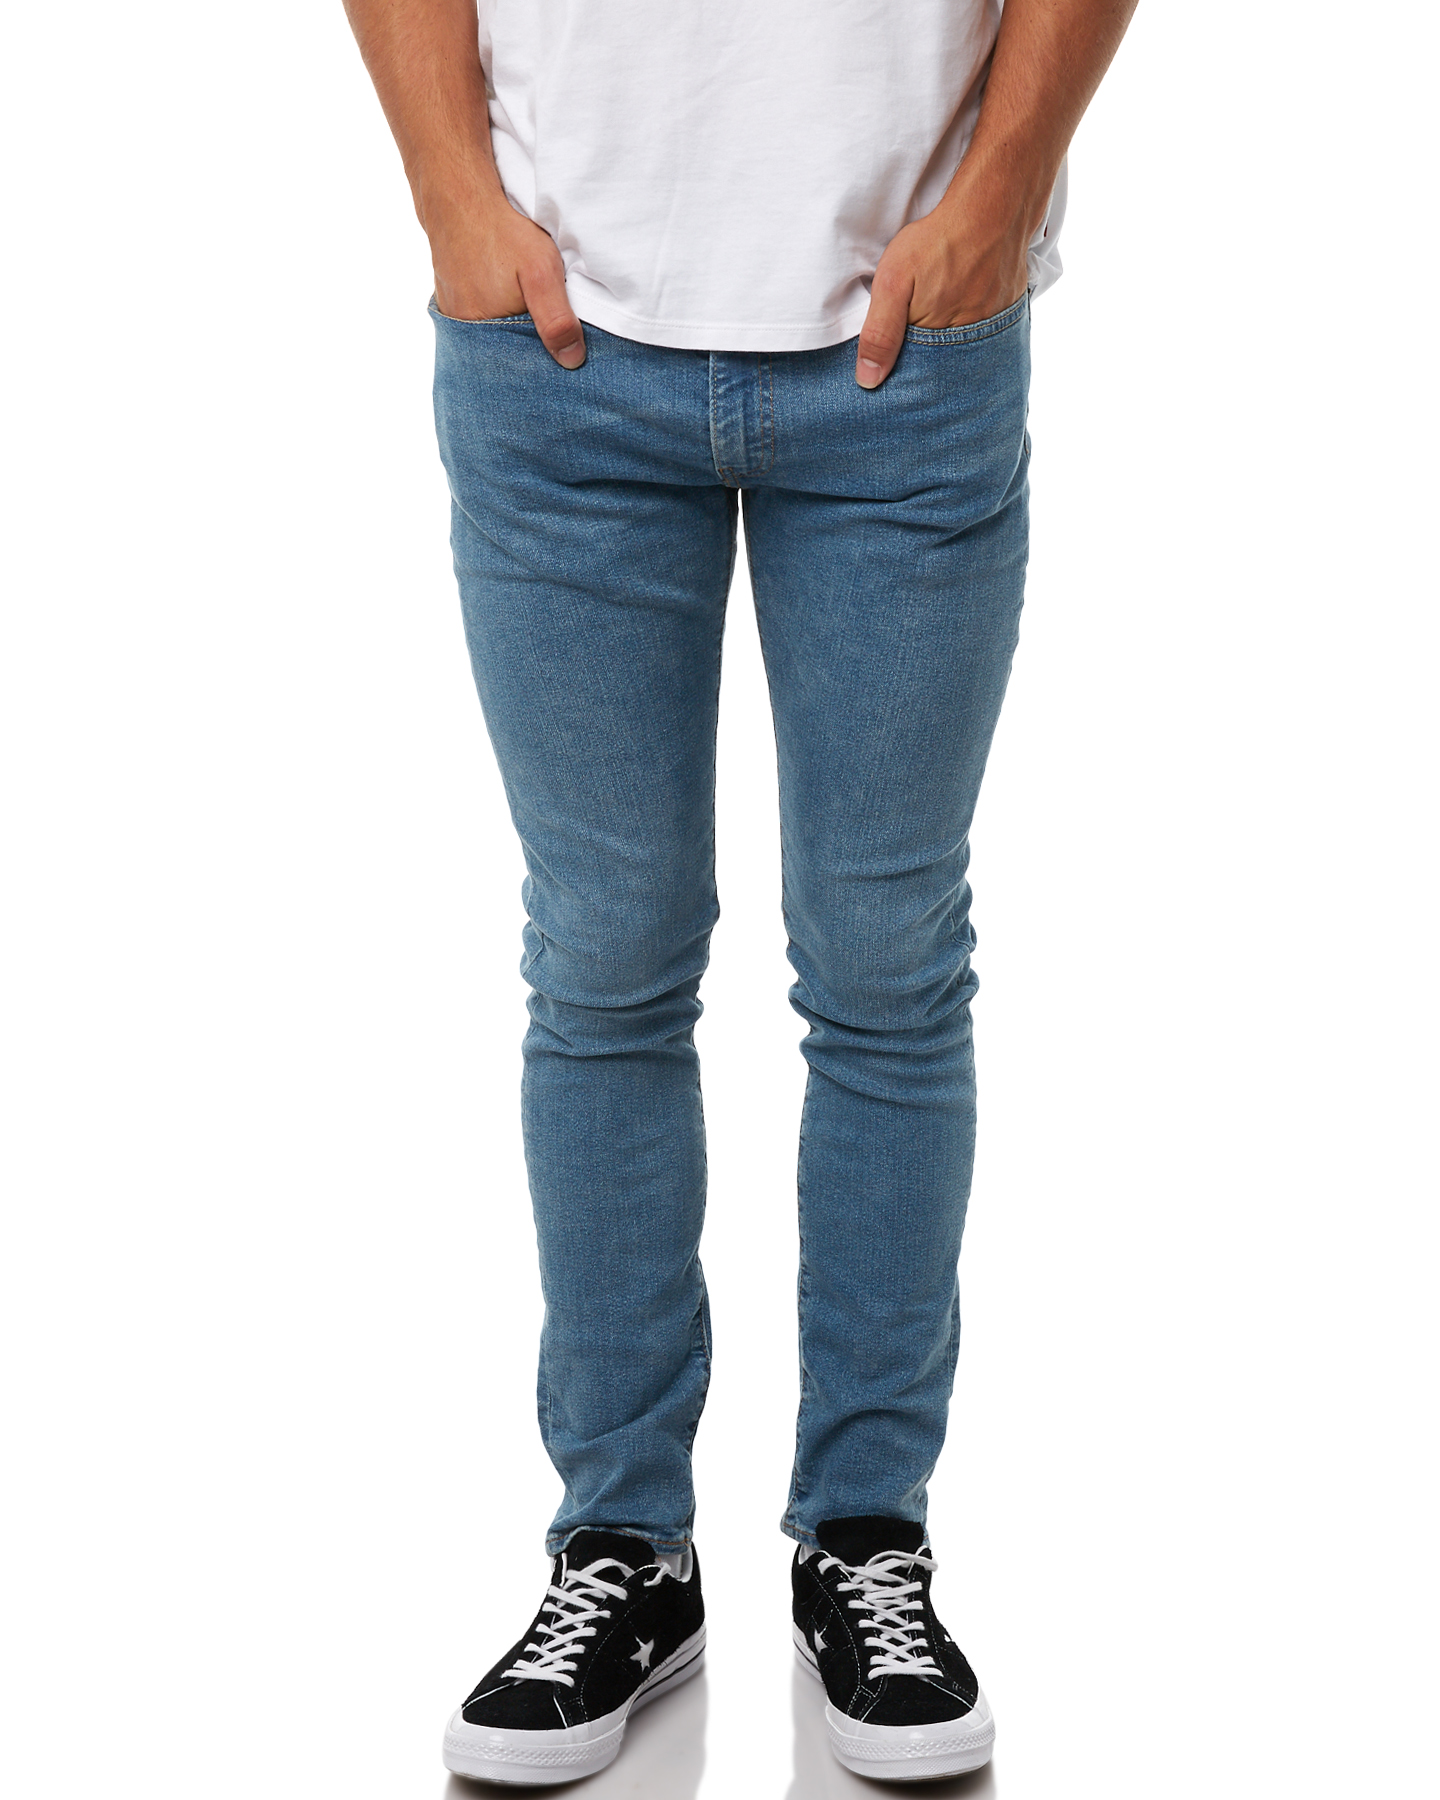 Injection tuberculosis Deter Levi`S 519 Extreme Skinny Mens Jean - Satire Adv Str | SurfStitch